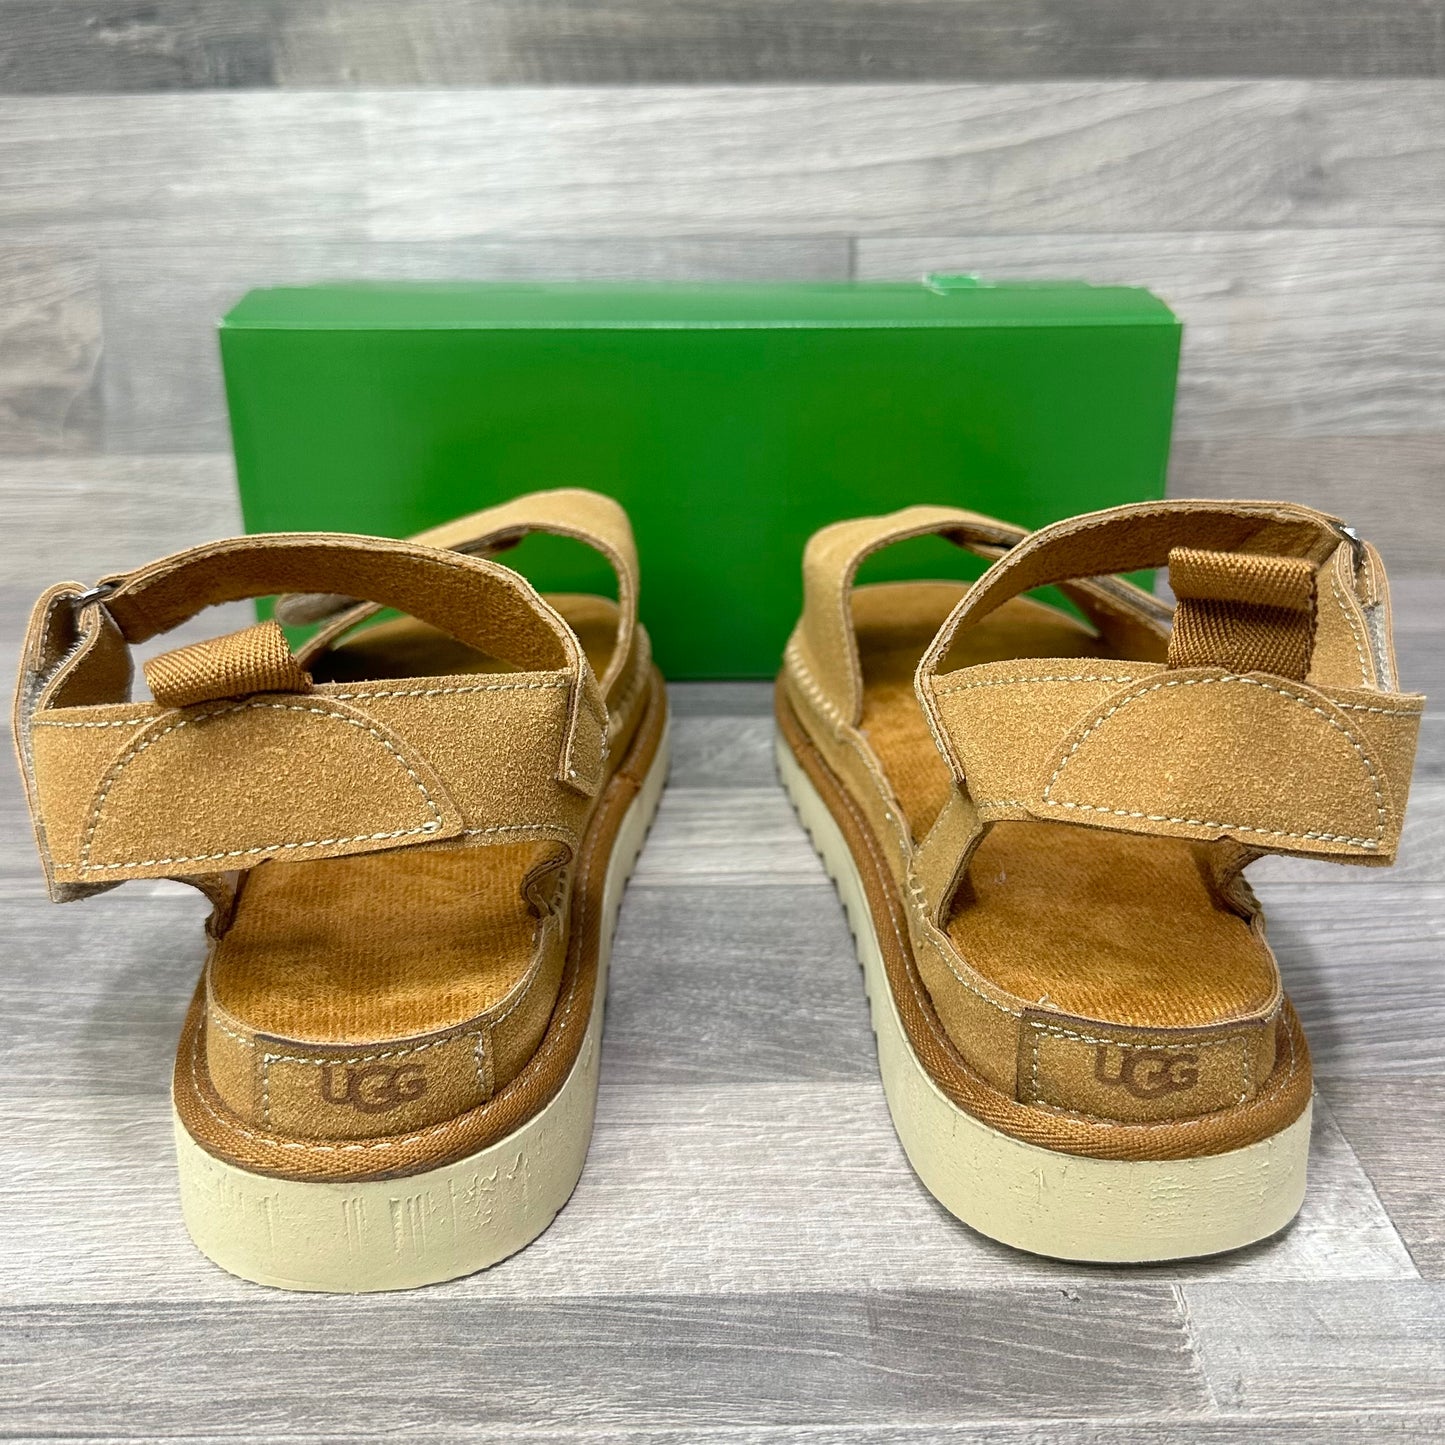 Ugg Sandals Brown 1 bags